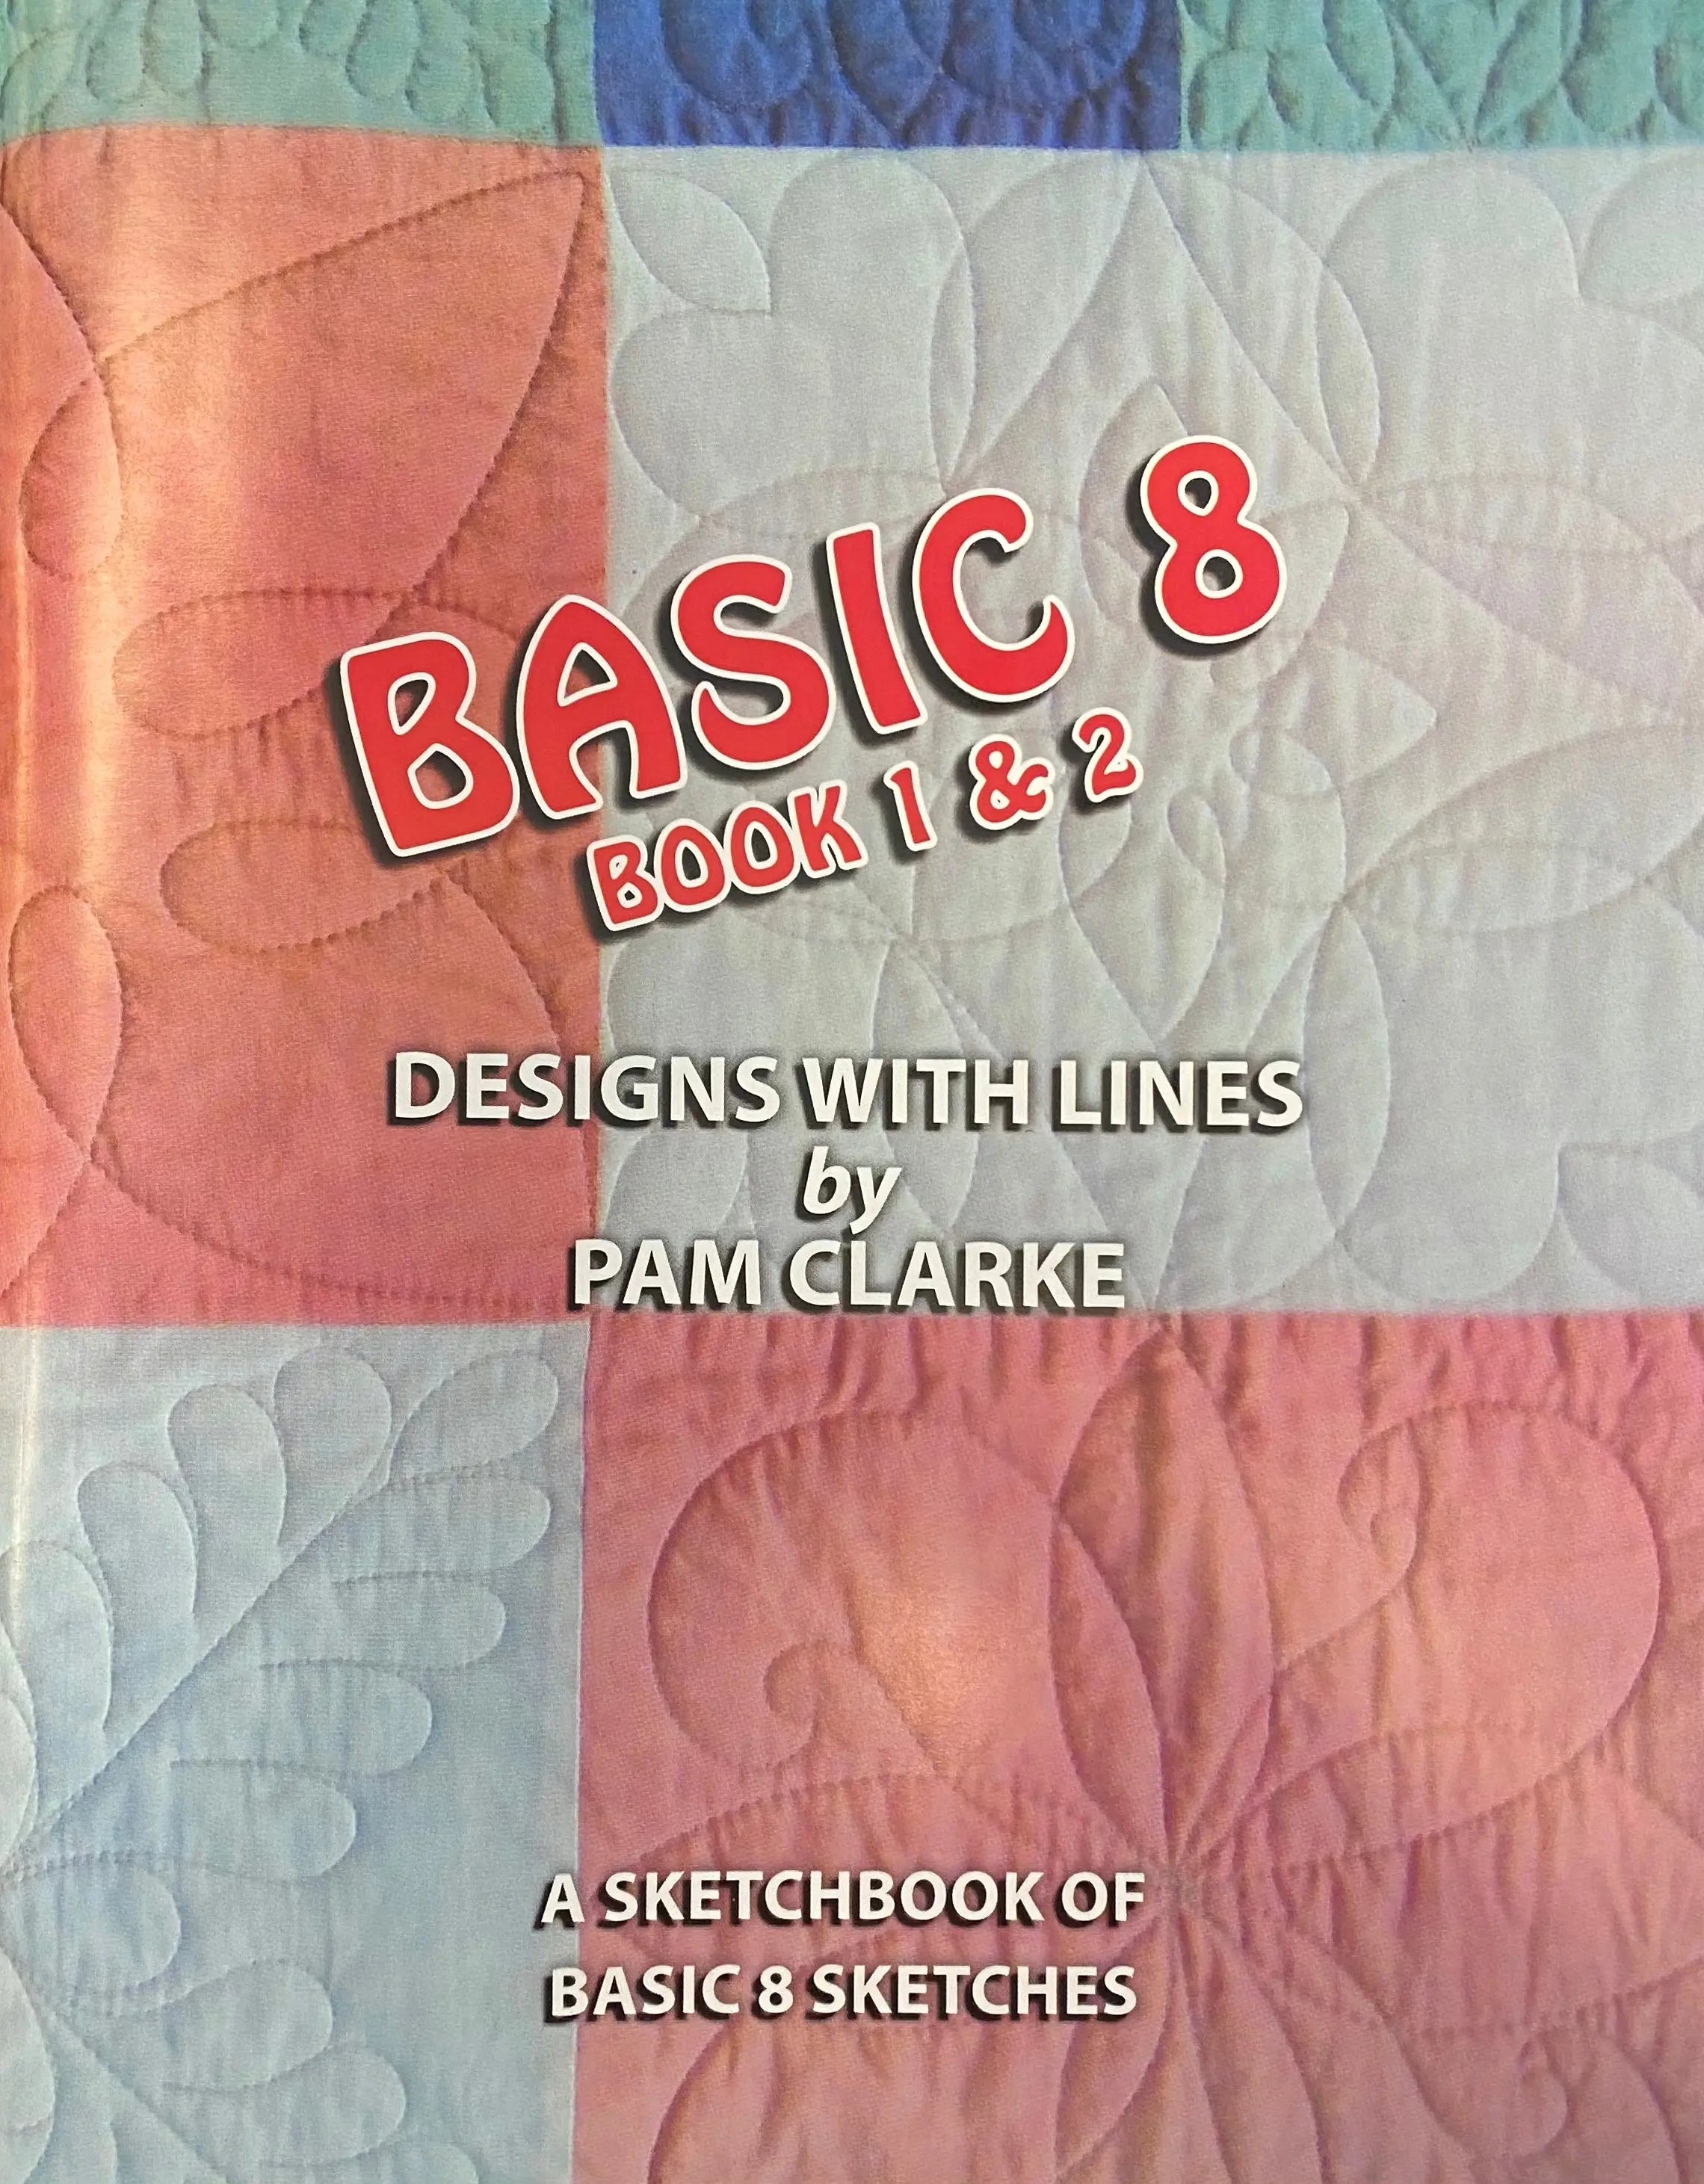 1887 Basic 8 Lines Book 1 & 2